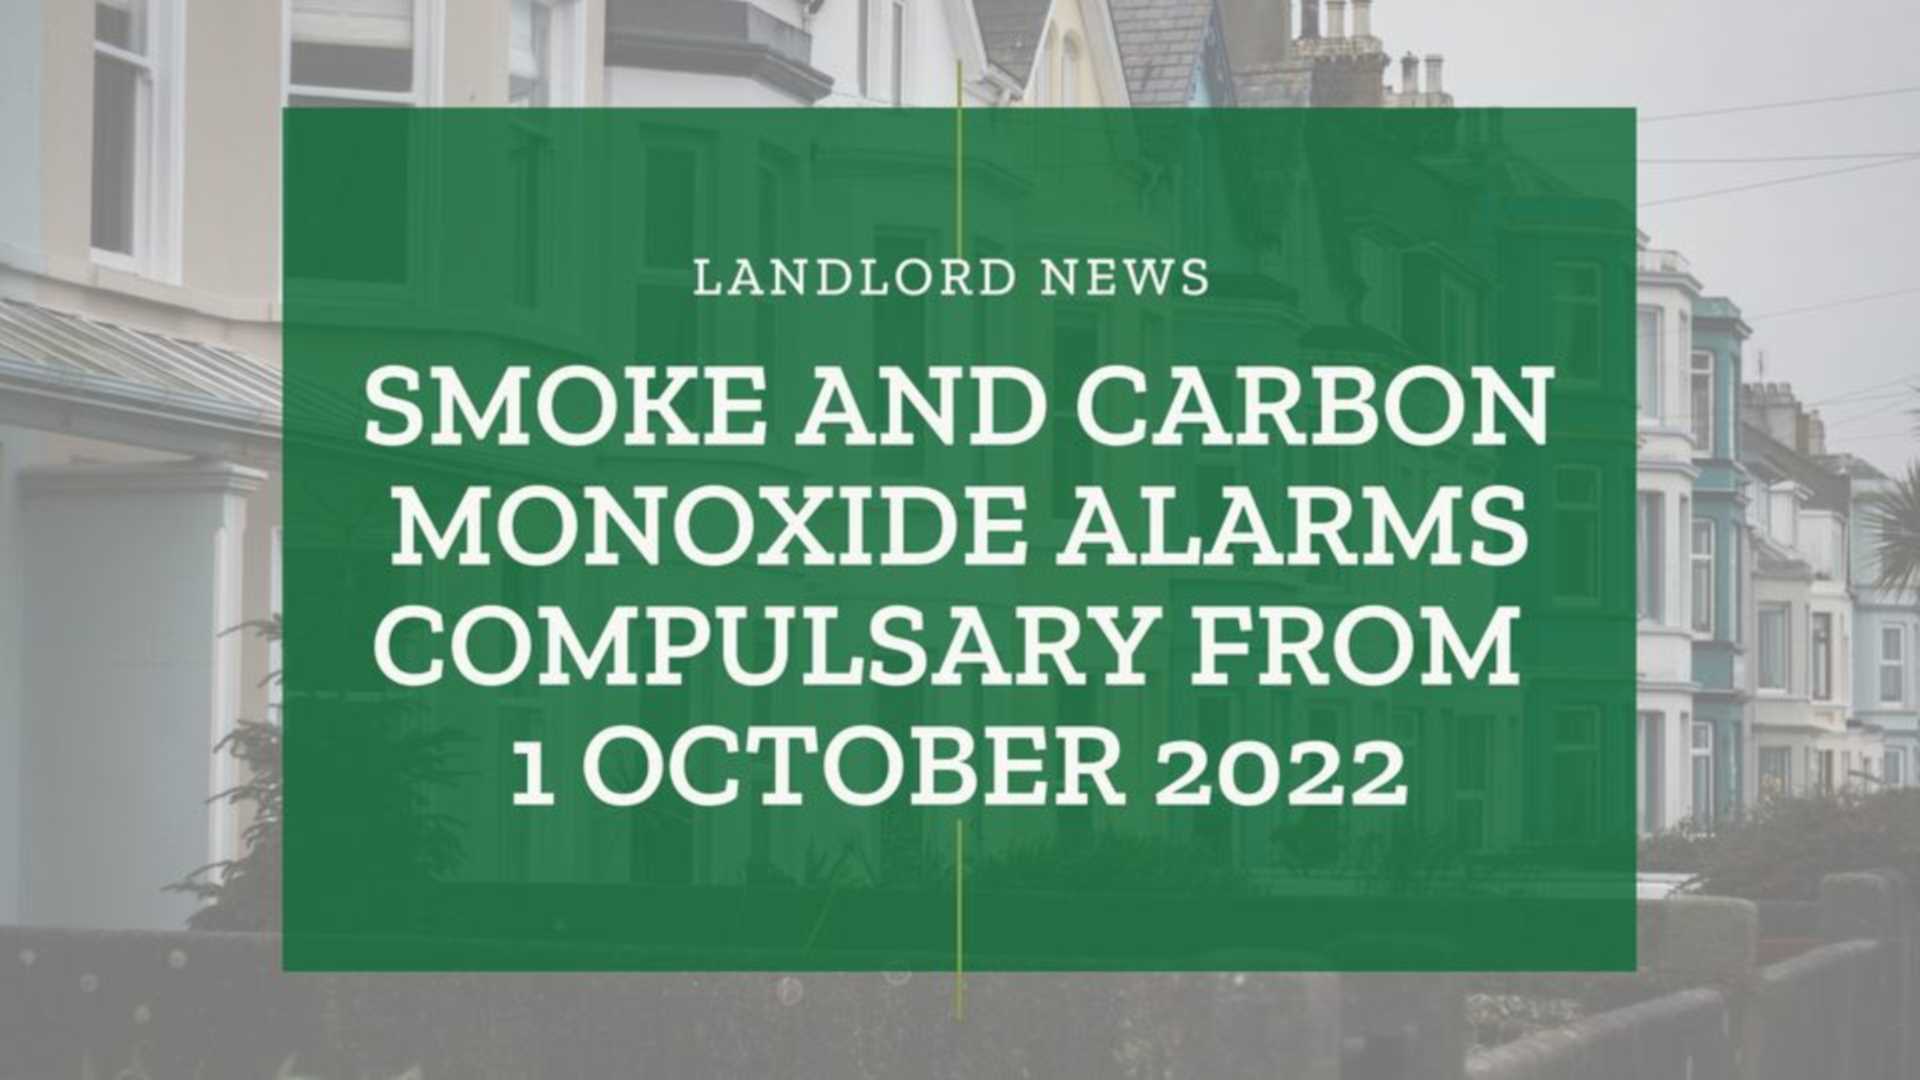 Smoke And Carbon Monoxide Alarms Compulsory From 1 October 2022